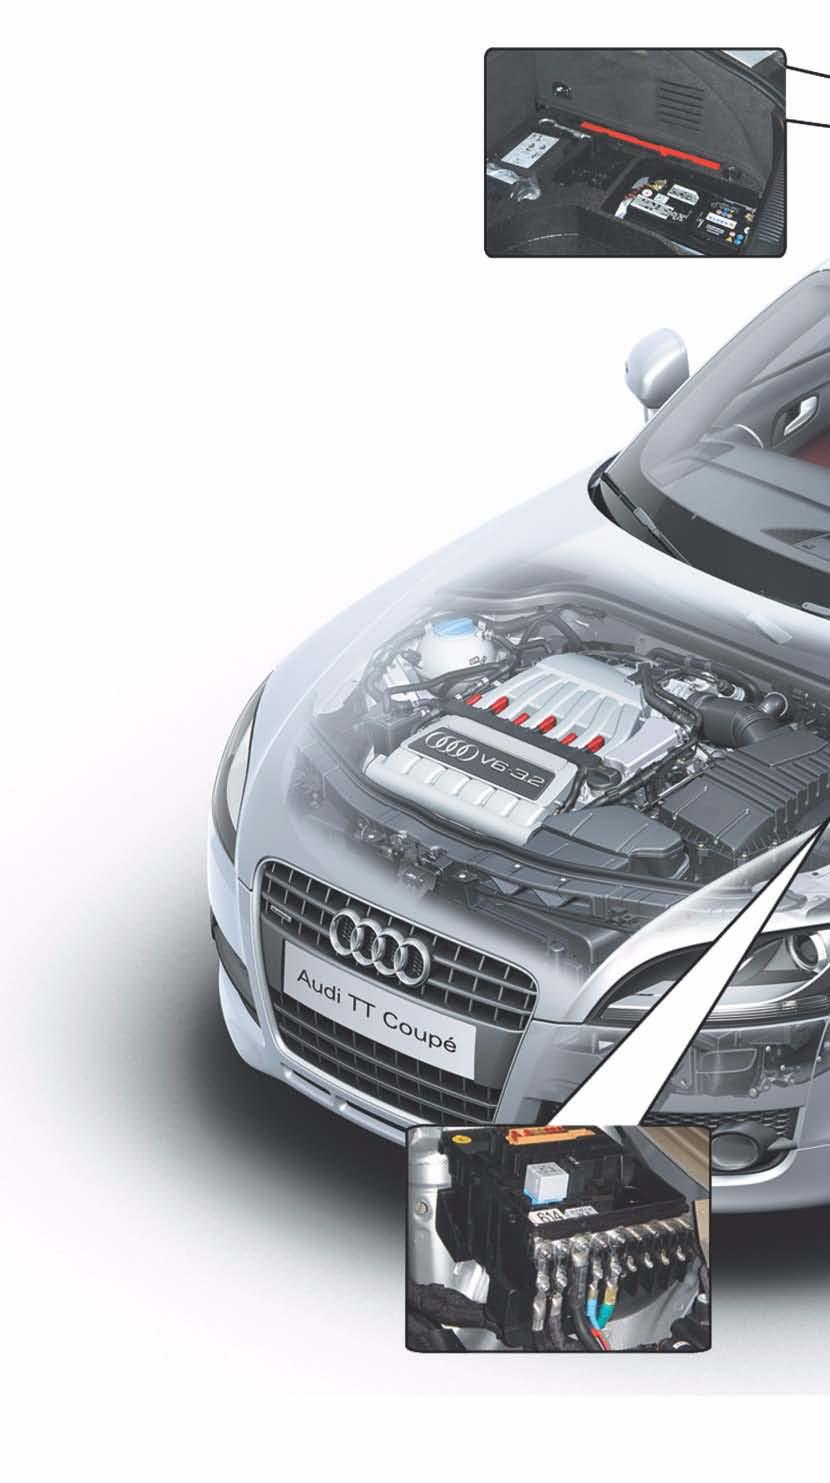 Overview Fuses and relays The fuse and relay carriers In the Audi TT Coupé 07 the fuse and relay carriers are located in the following positions: Electronics box in engine compartment, front left